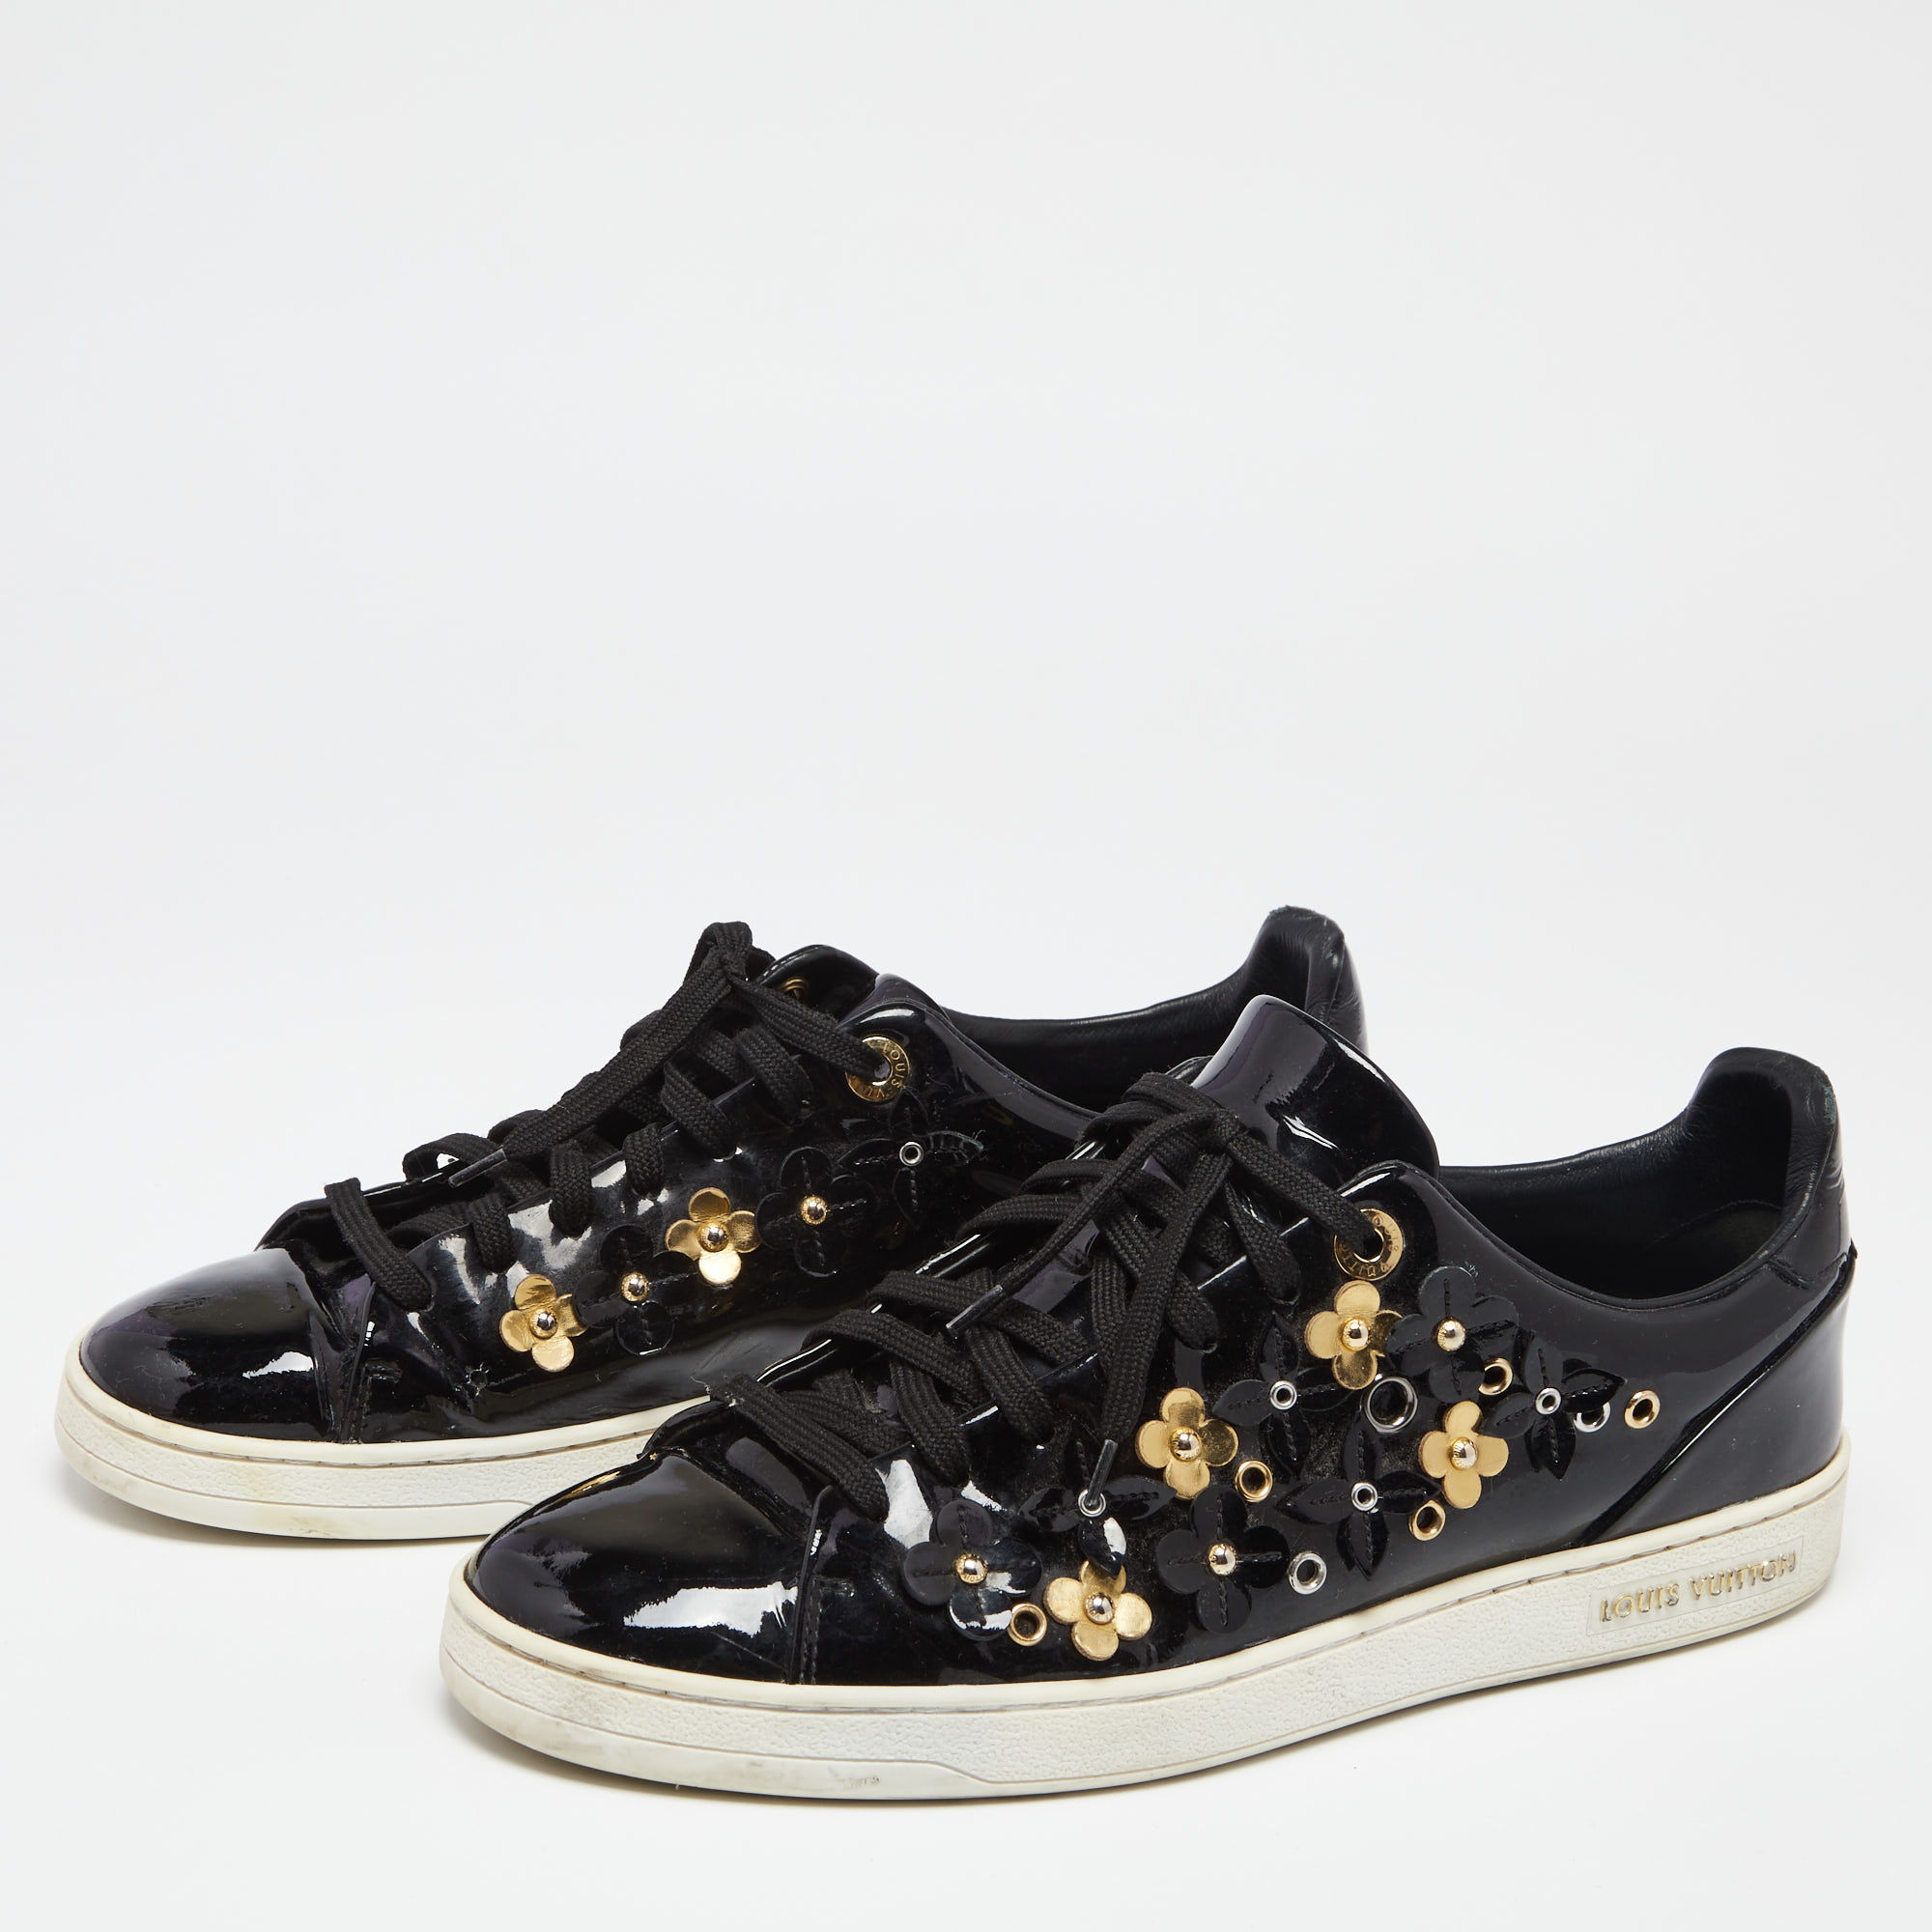 

Louis Vuitton Black Patent Leather Frontrow Blossom Floral Embellished Low Top Sneakers Size